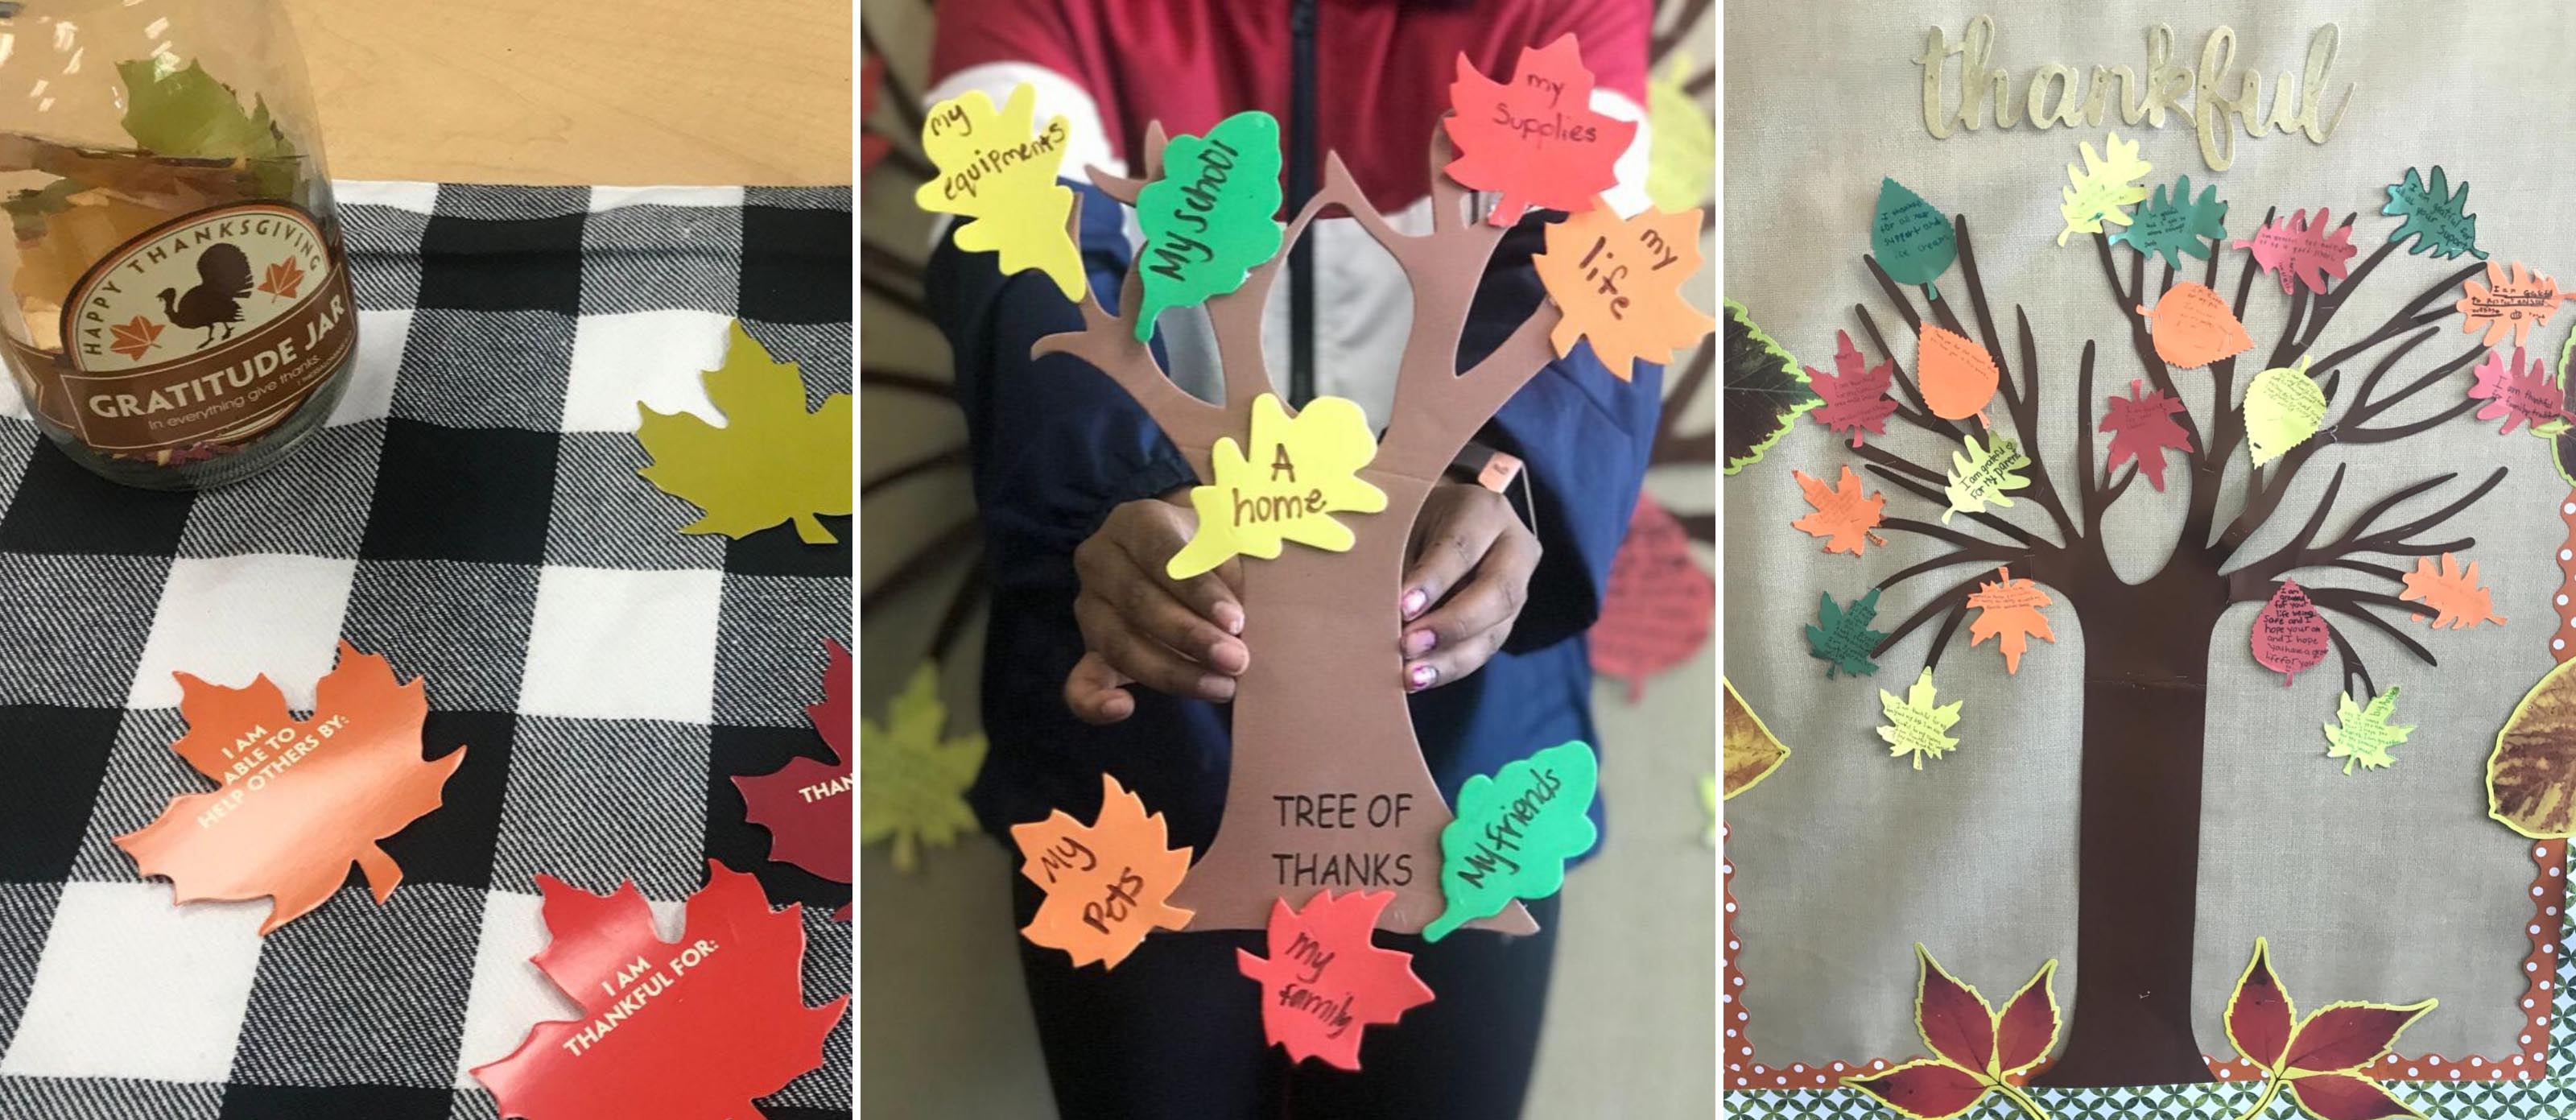 Gratitude Boards for Kids - A fun project that builds character!